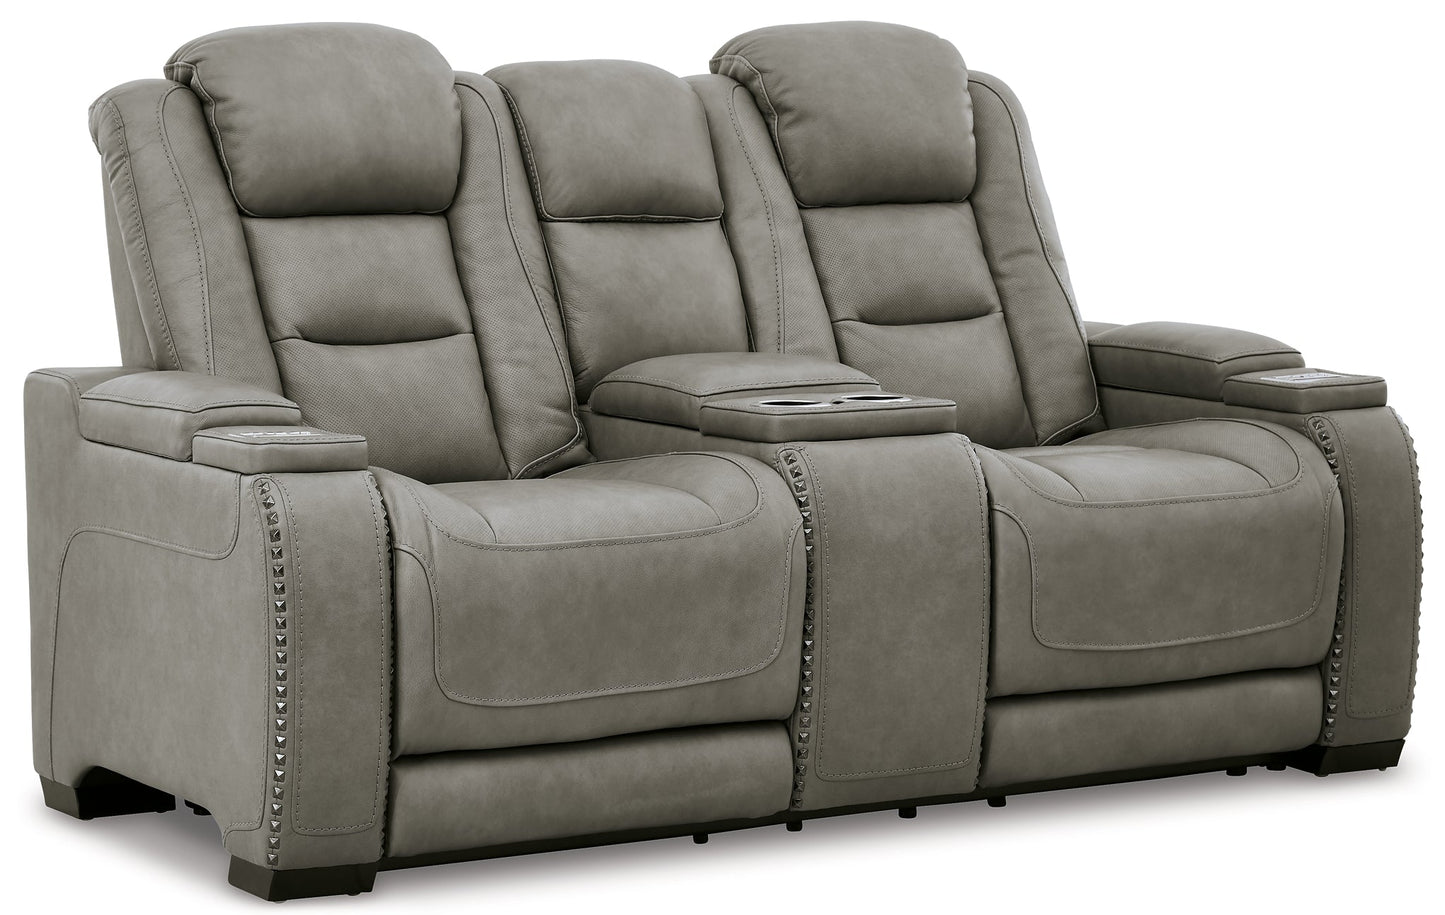 The Man-Den Sofa, Loveseat and Recliner at Walker Mattress and Furniture Locations in Cedar Park and Belton TX.